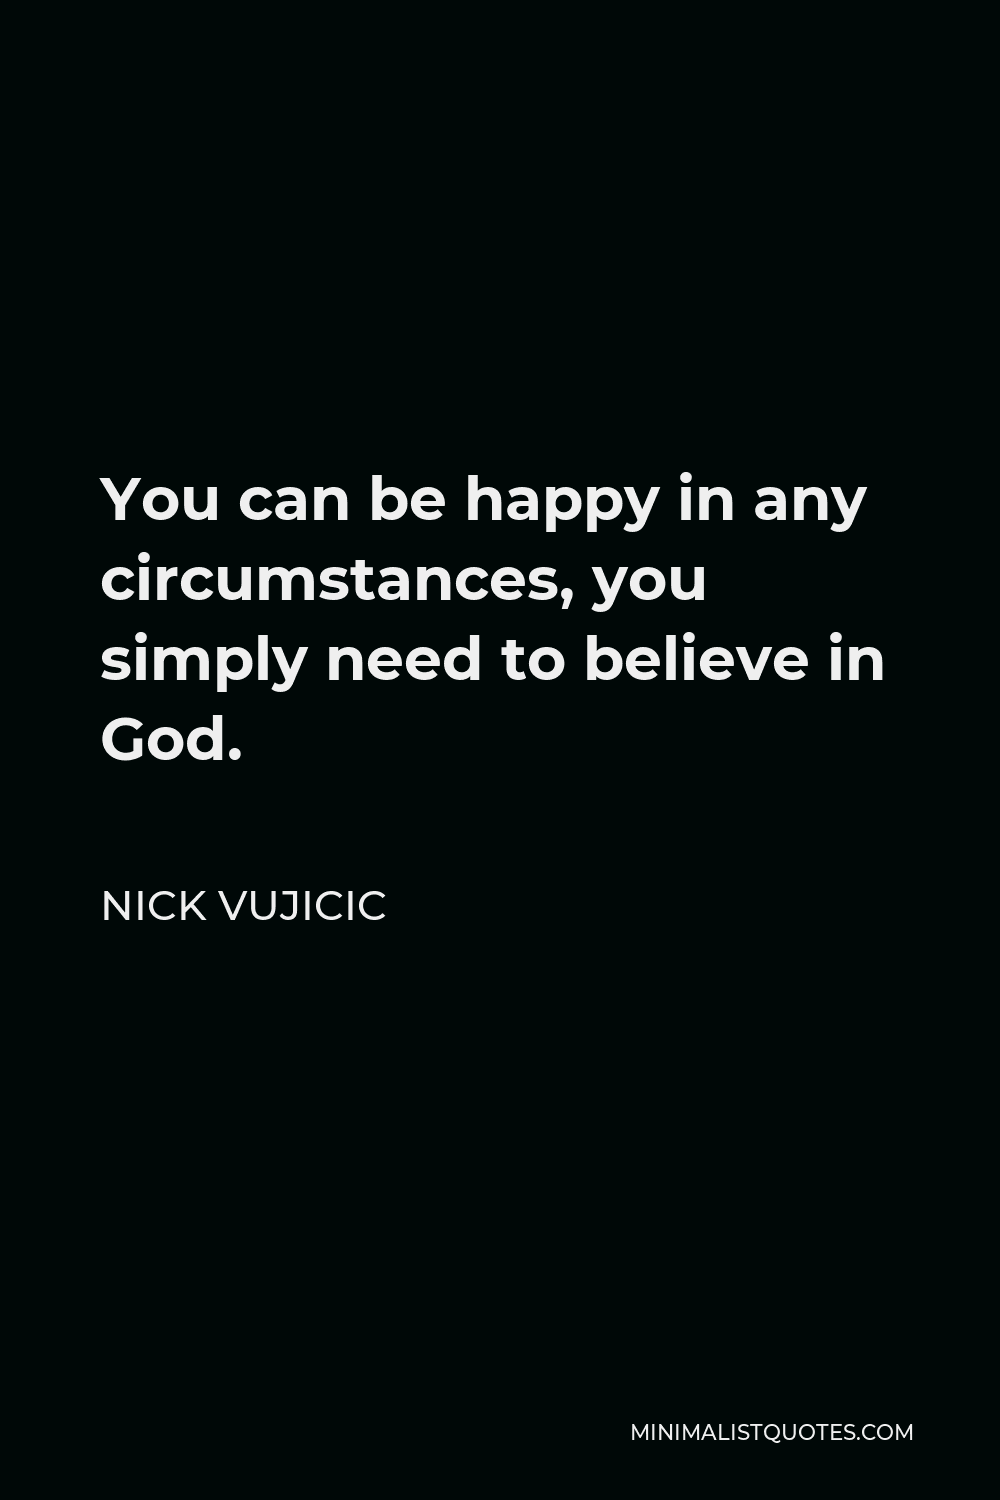 Nick Vujicic Quote - You can be happy in any circumstances, you simply need to believe in God.